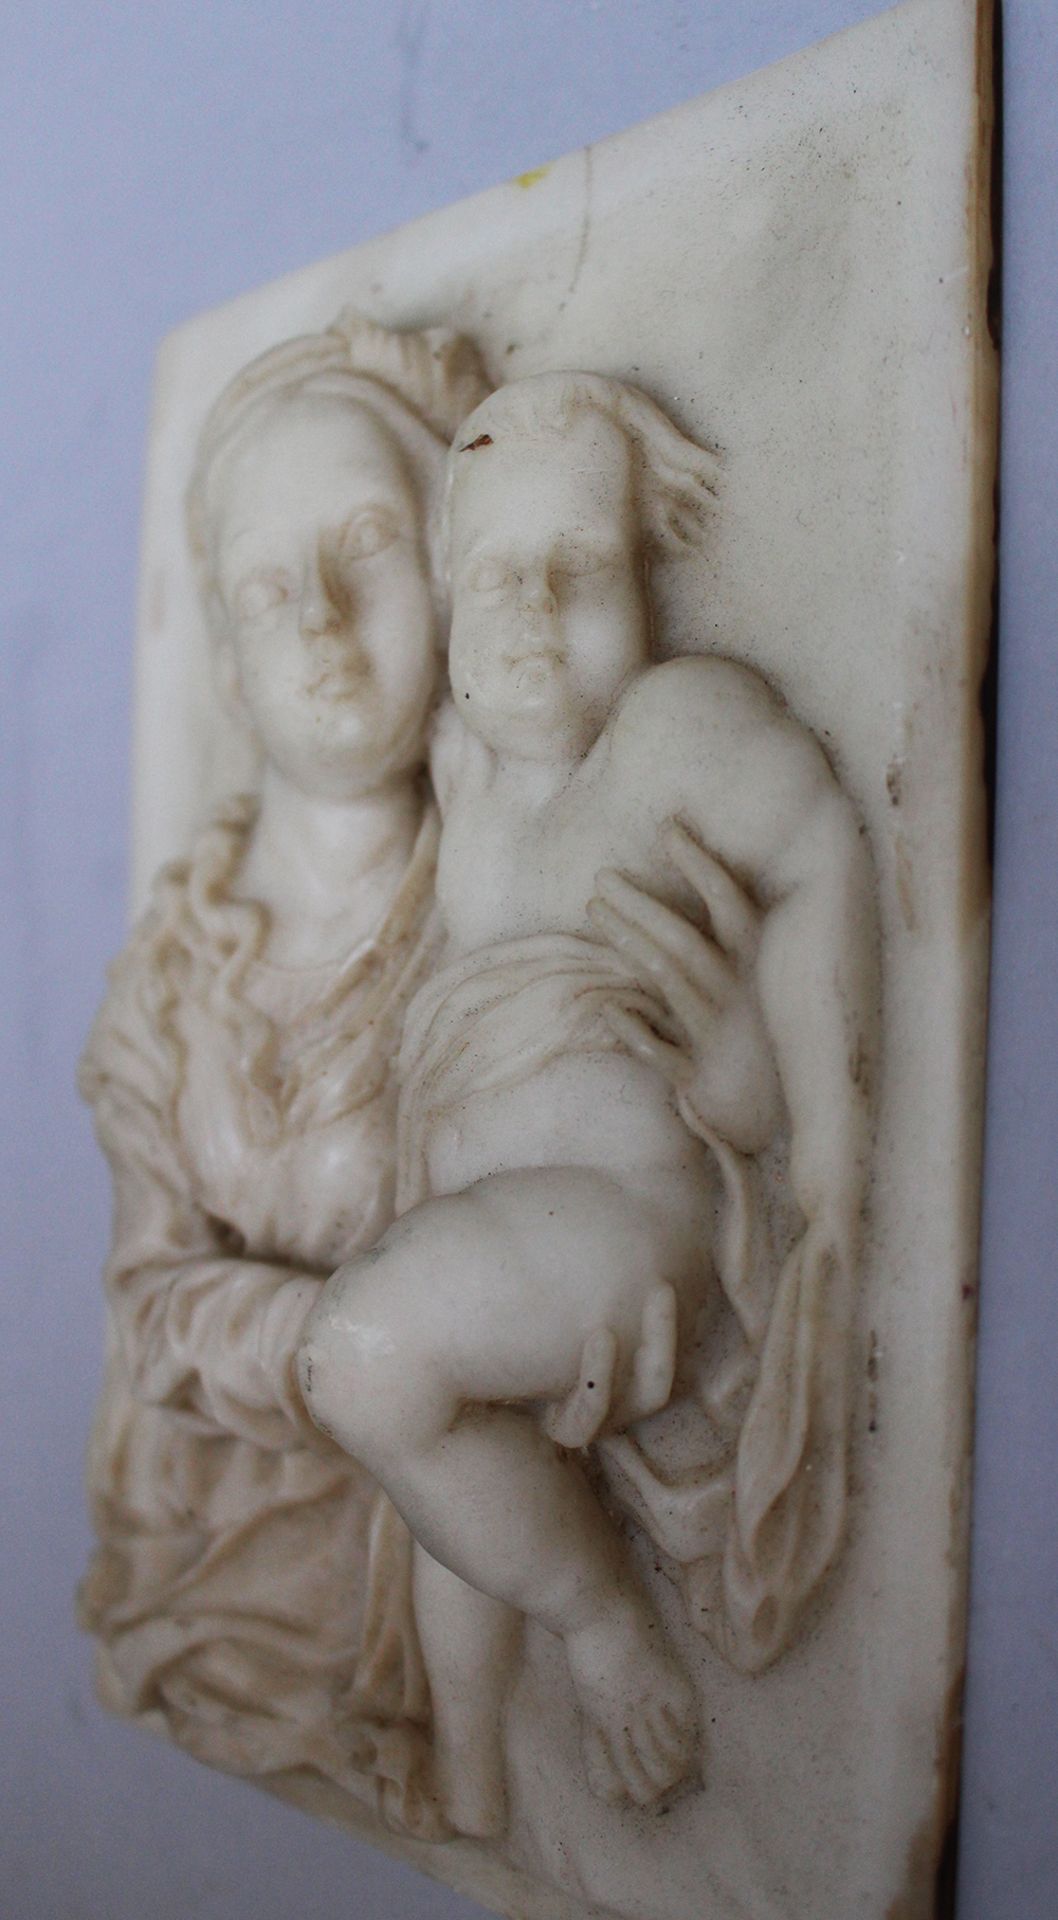 Plaquette with Maria and child in folded cloth, on rectangular plinth, 18x13cm. - Image 3 of 3